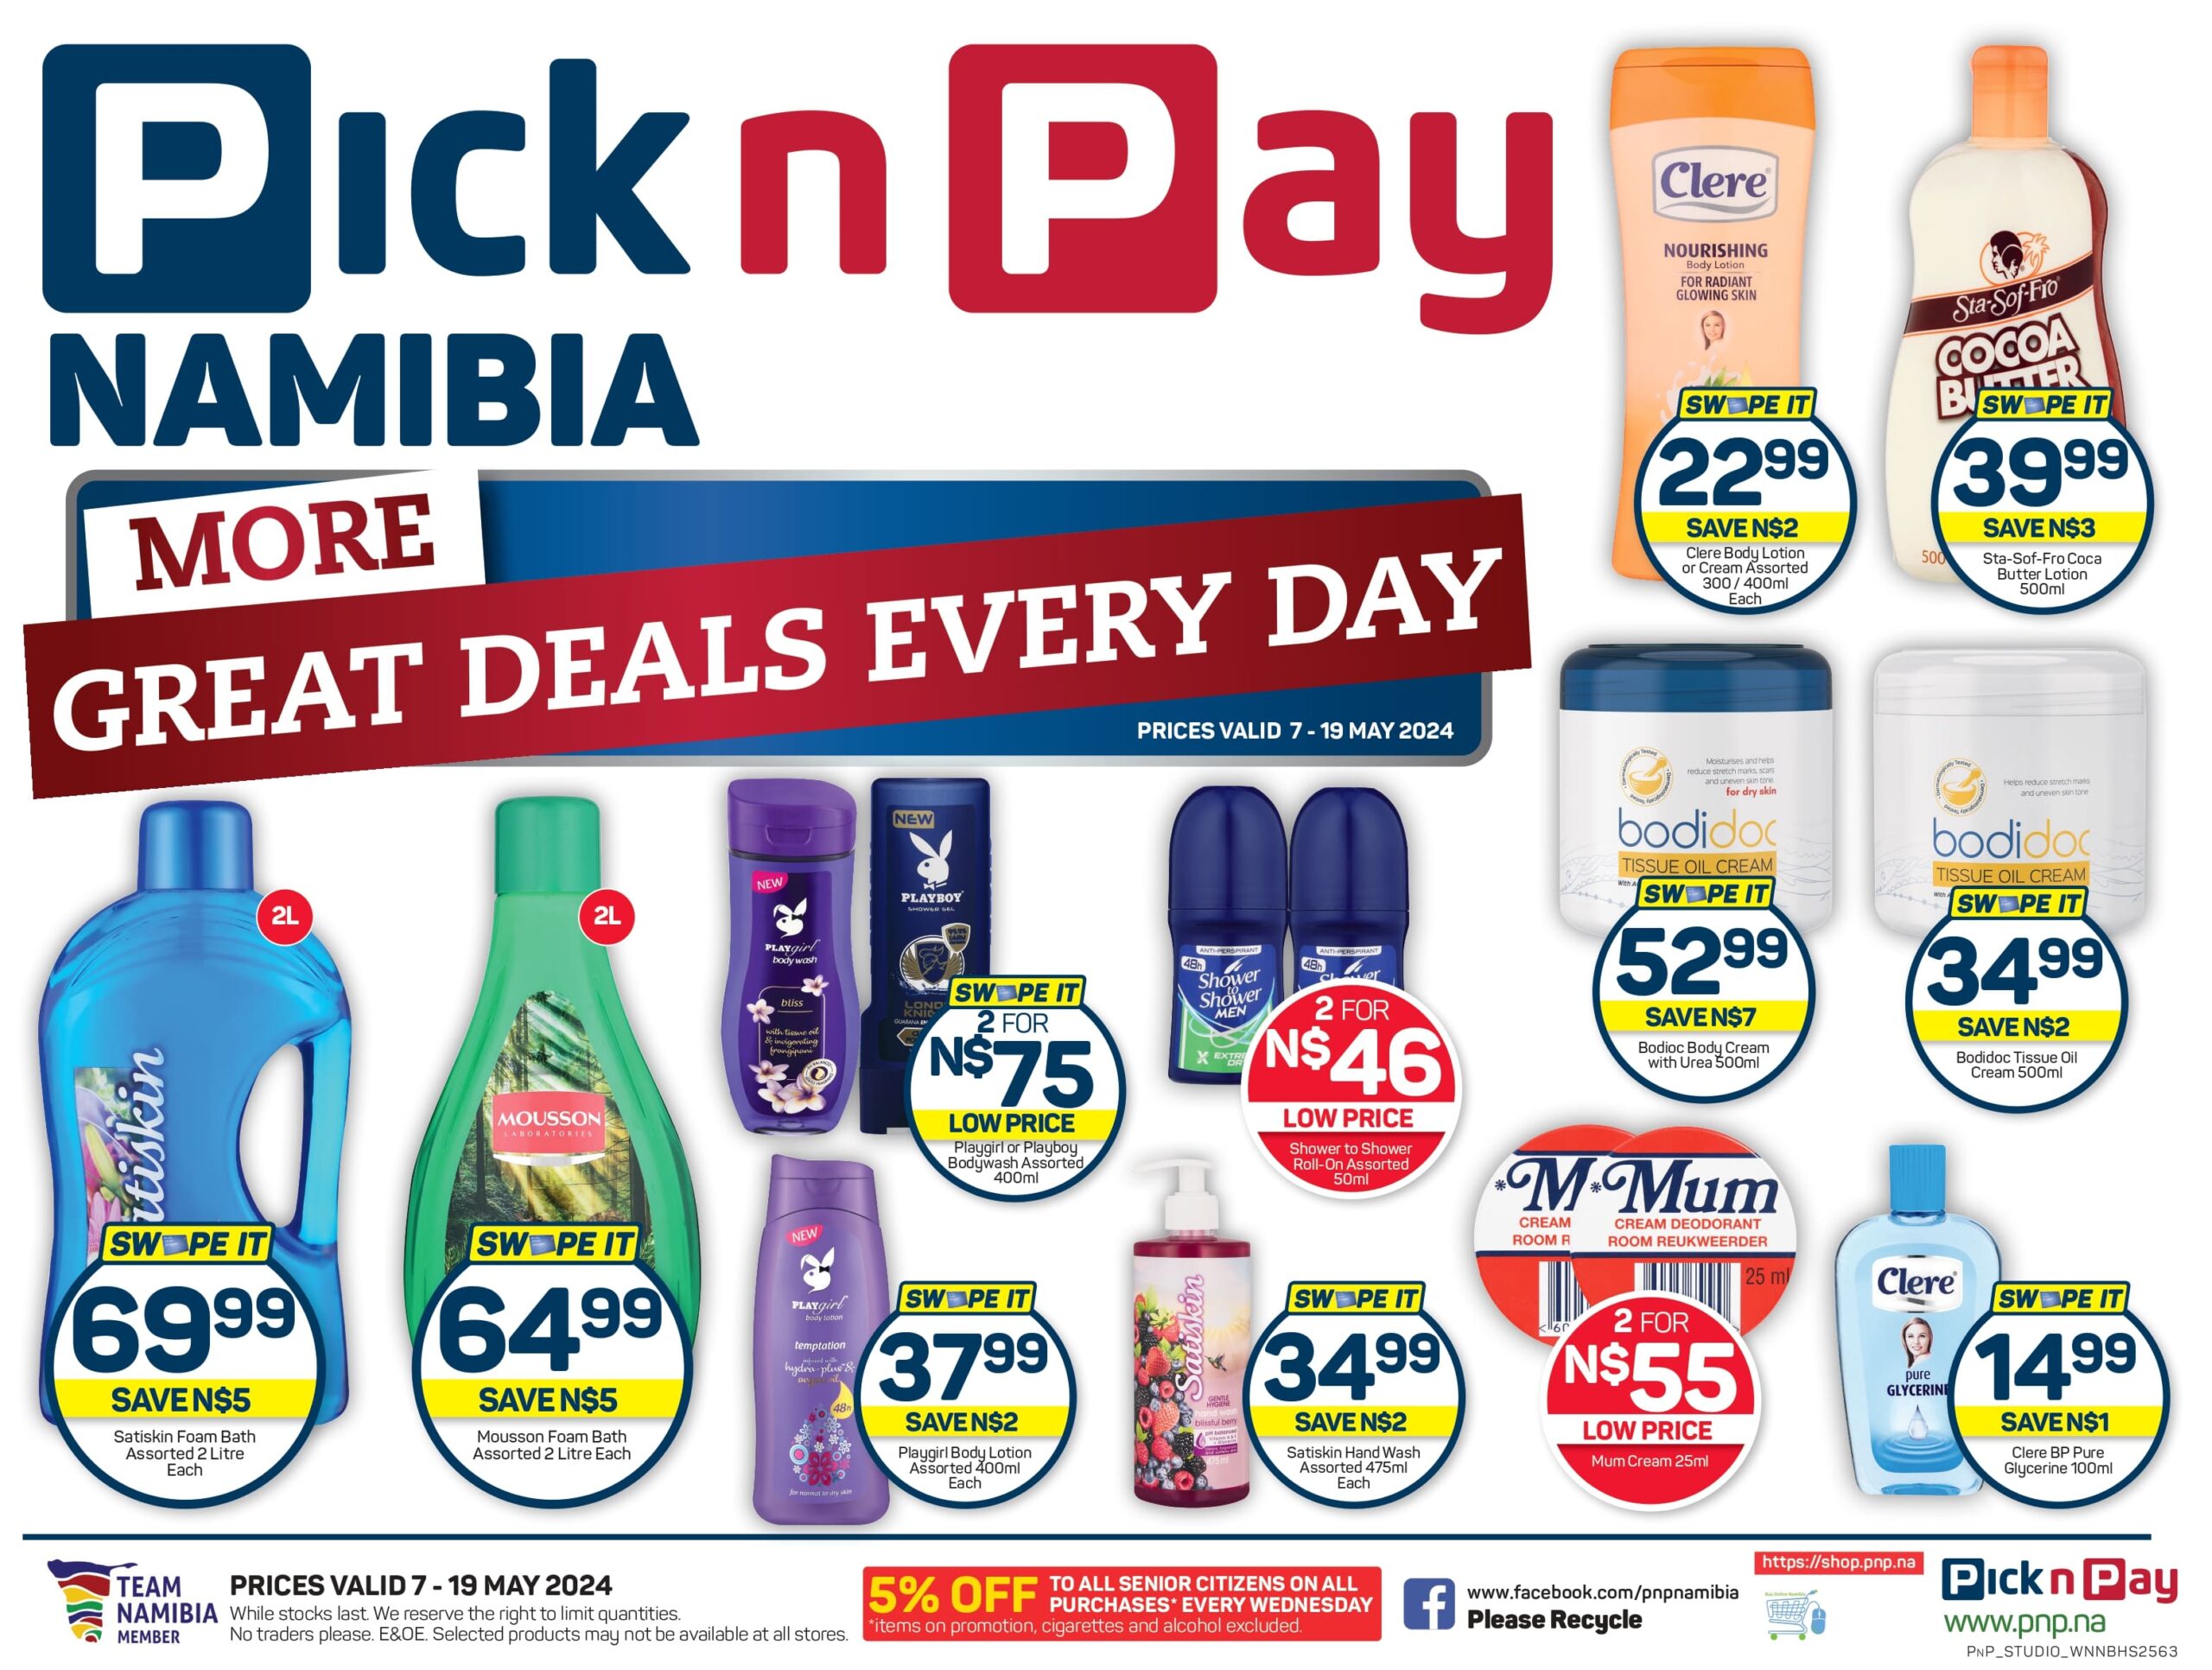 Pick n Pay Namibia Great Deals Everyday